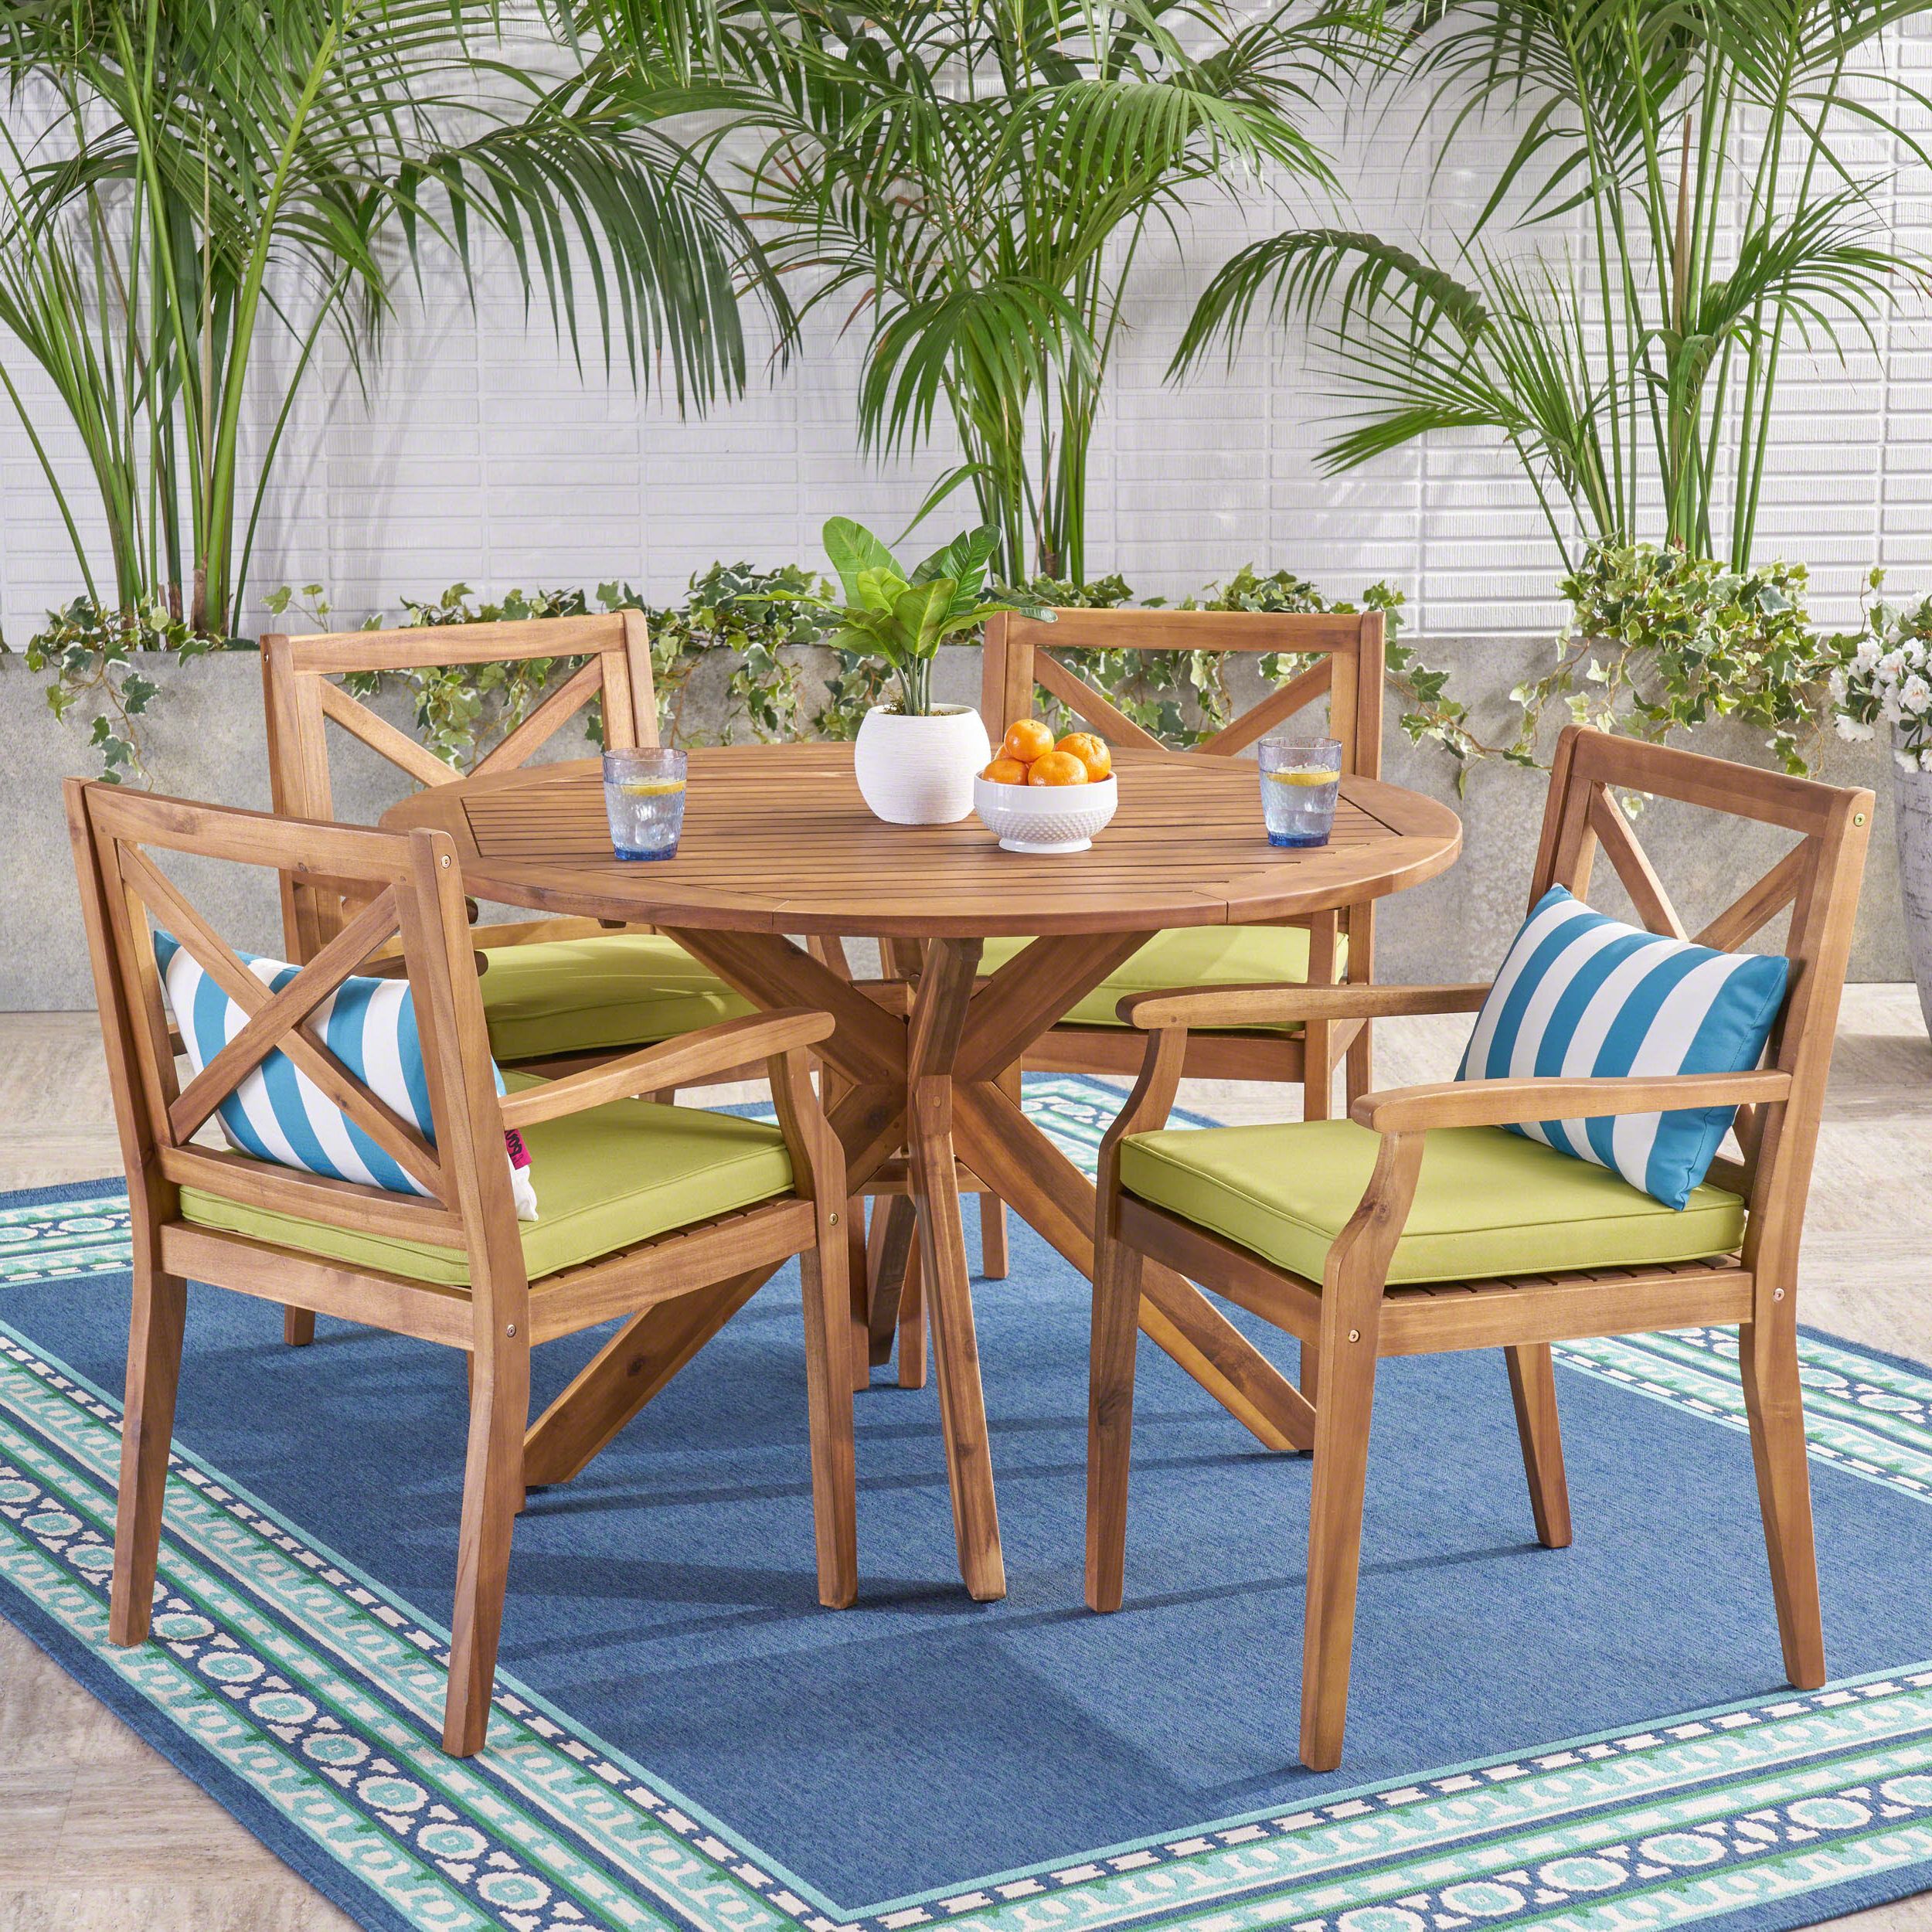 Most Popular 5 Piece Round Dining Sets Pertaining To Oakley Outdoor 5 Piece Acacia Wood Round Dining Set With Cushions, Teak (View 1 of 15)